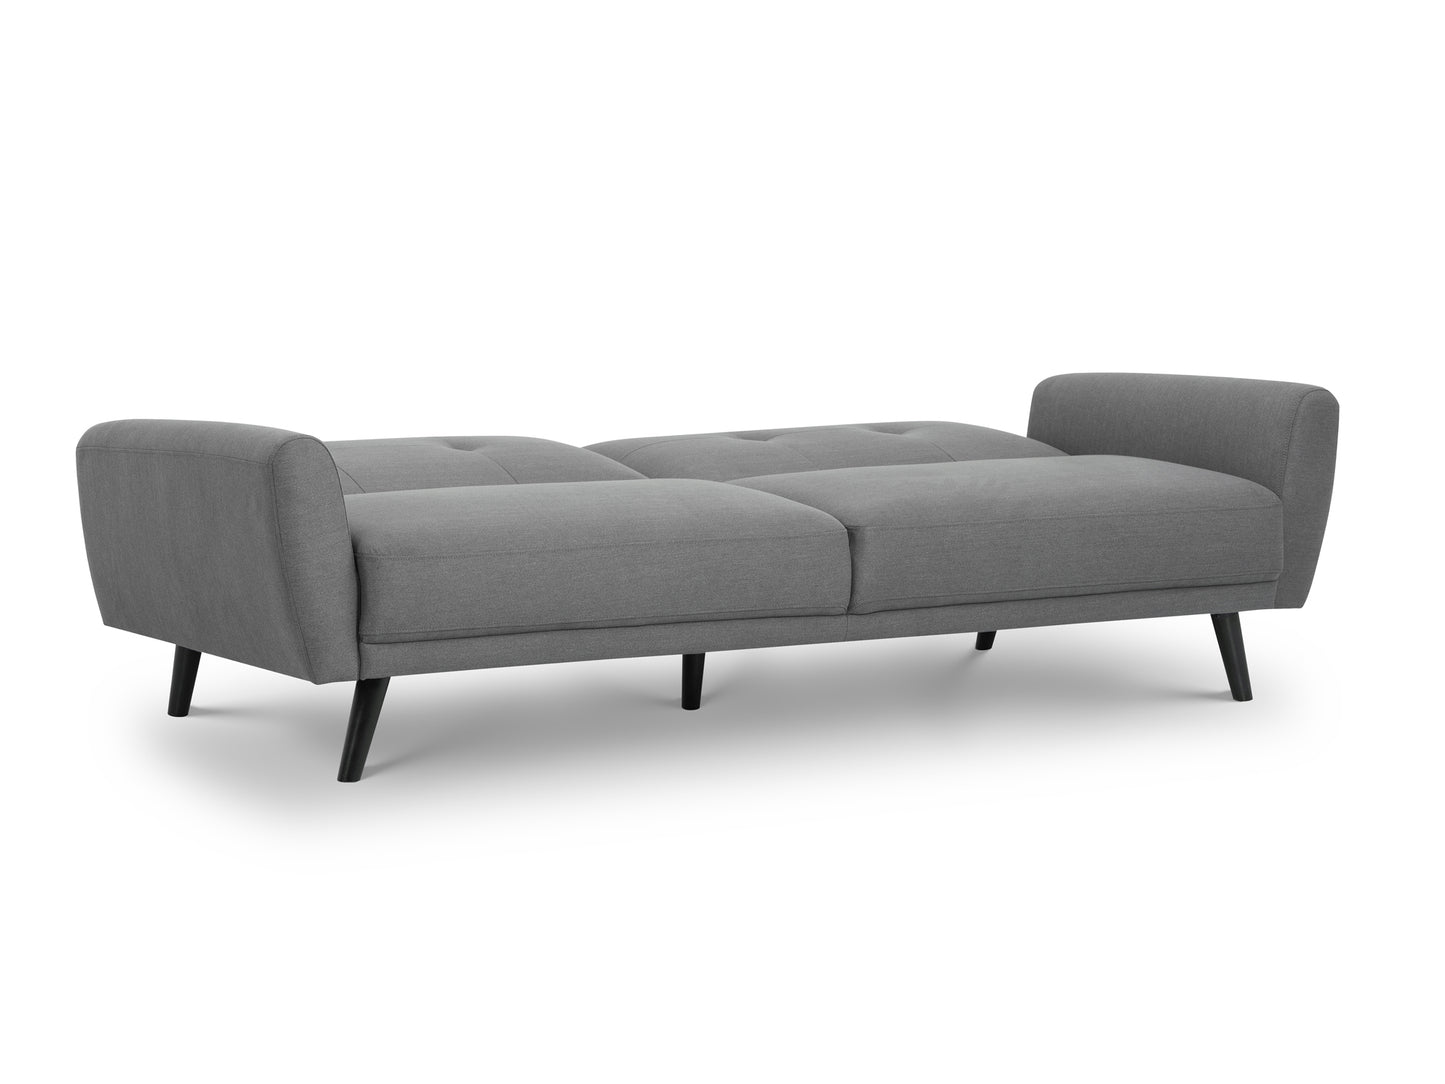 Monza Sofa and Sofa Bed in Grey Linen